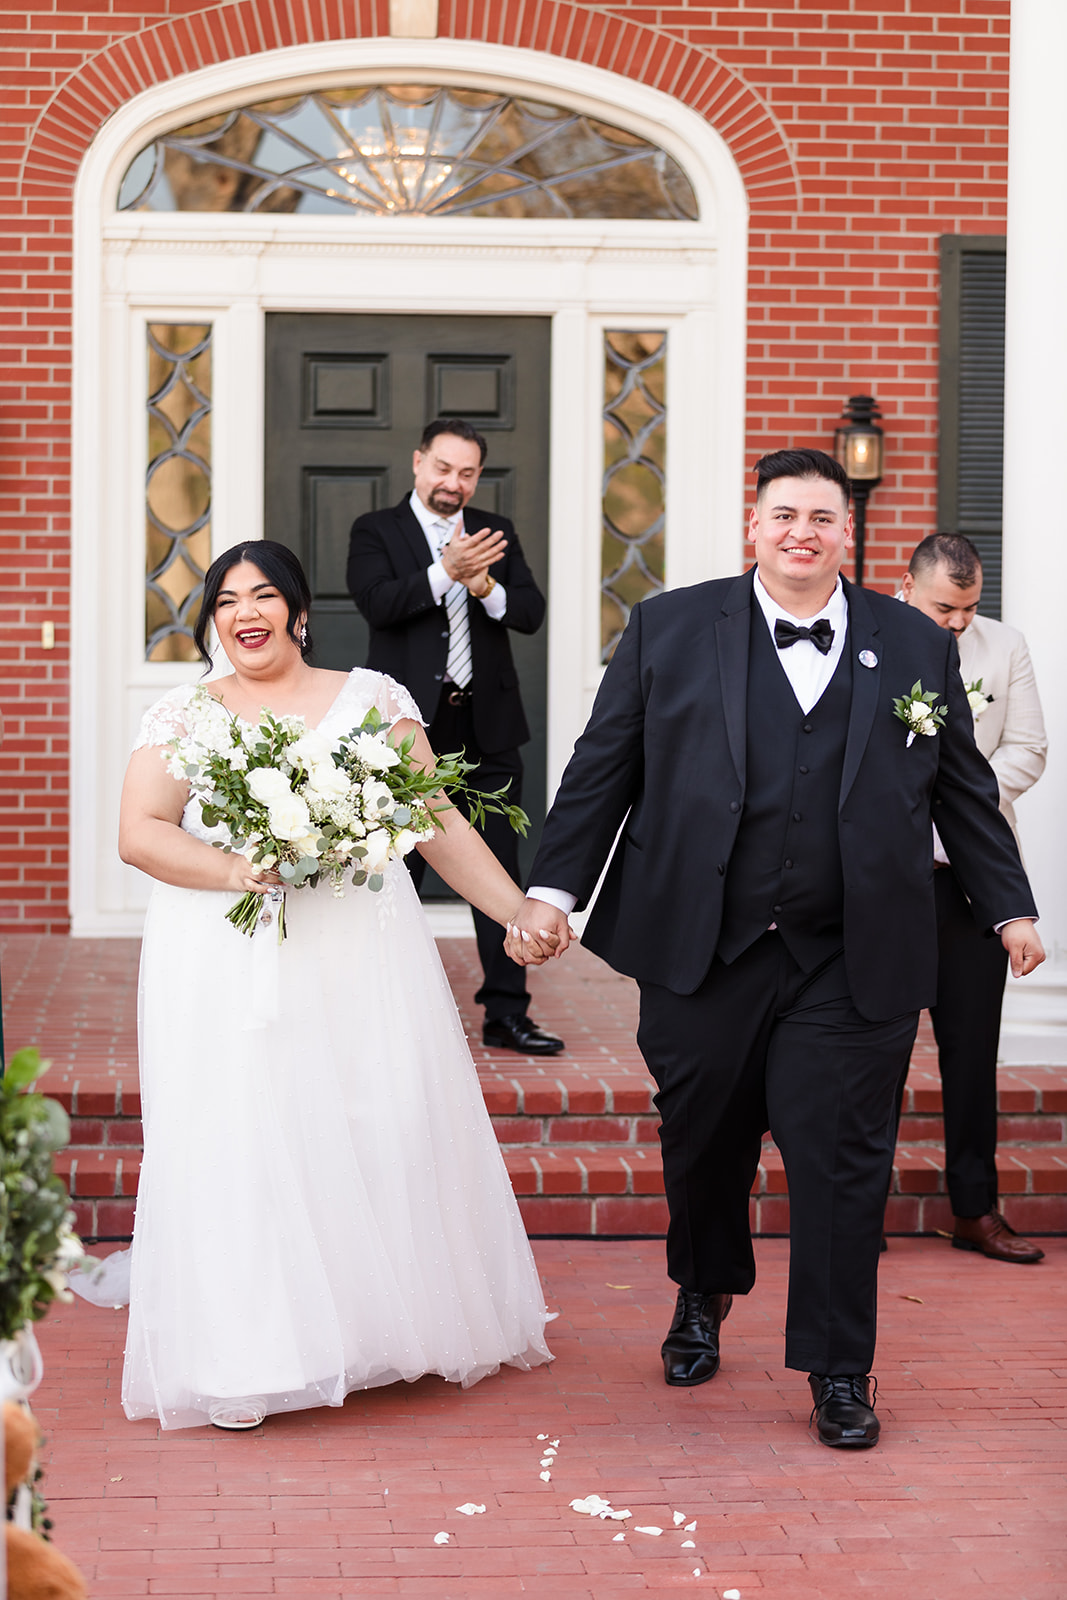 Newlywed recessional after wedding ceremony